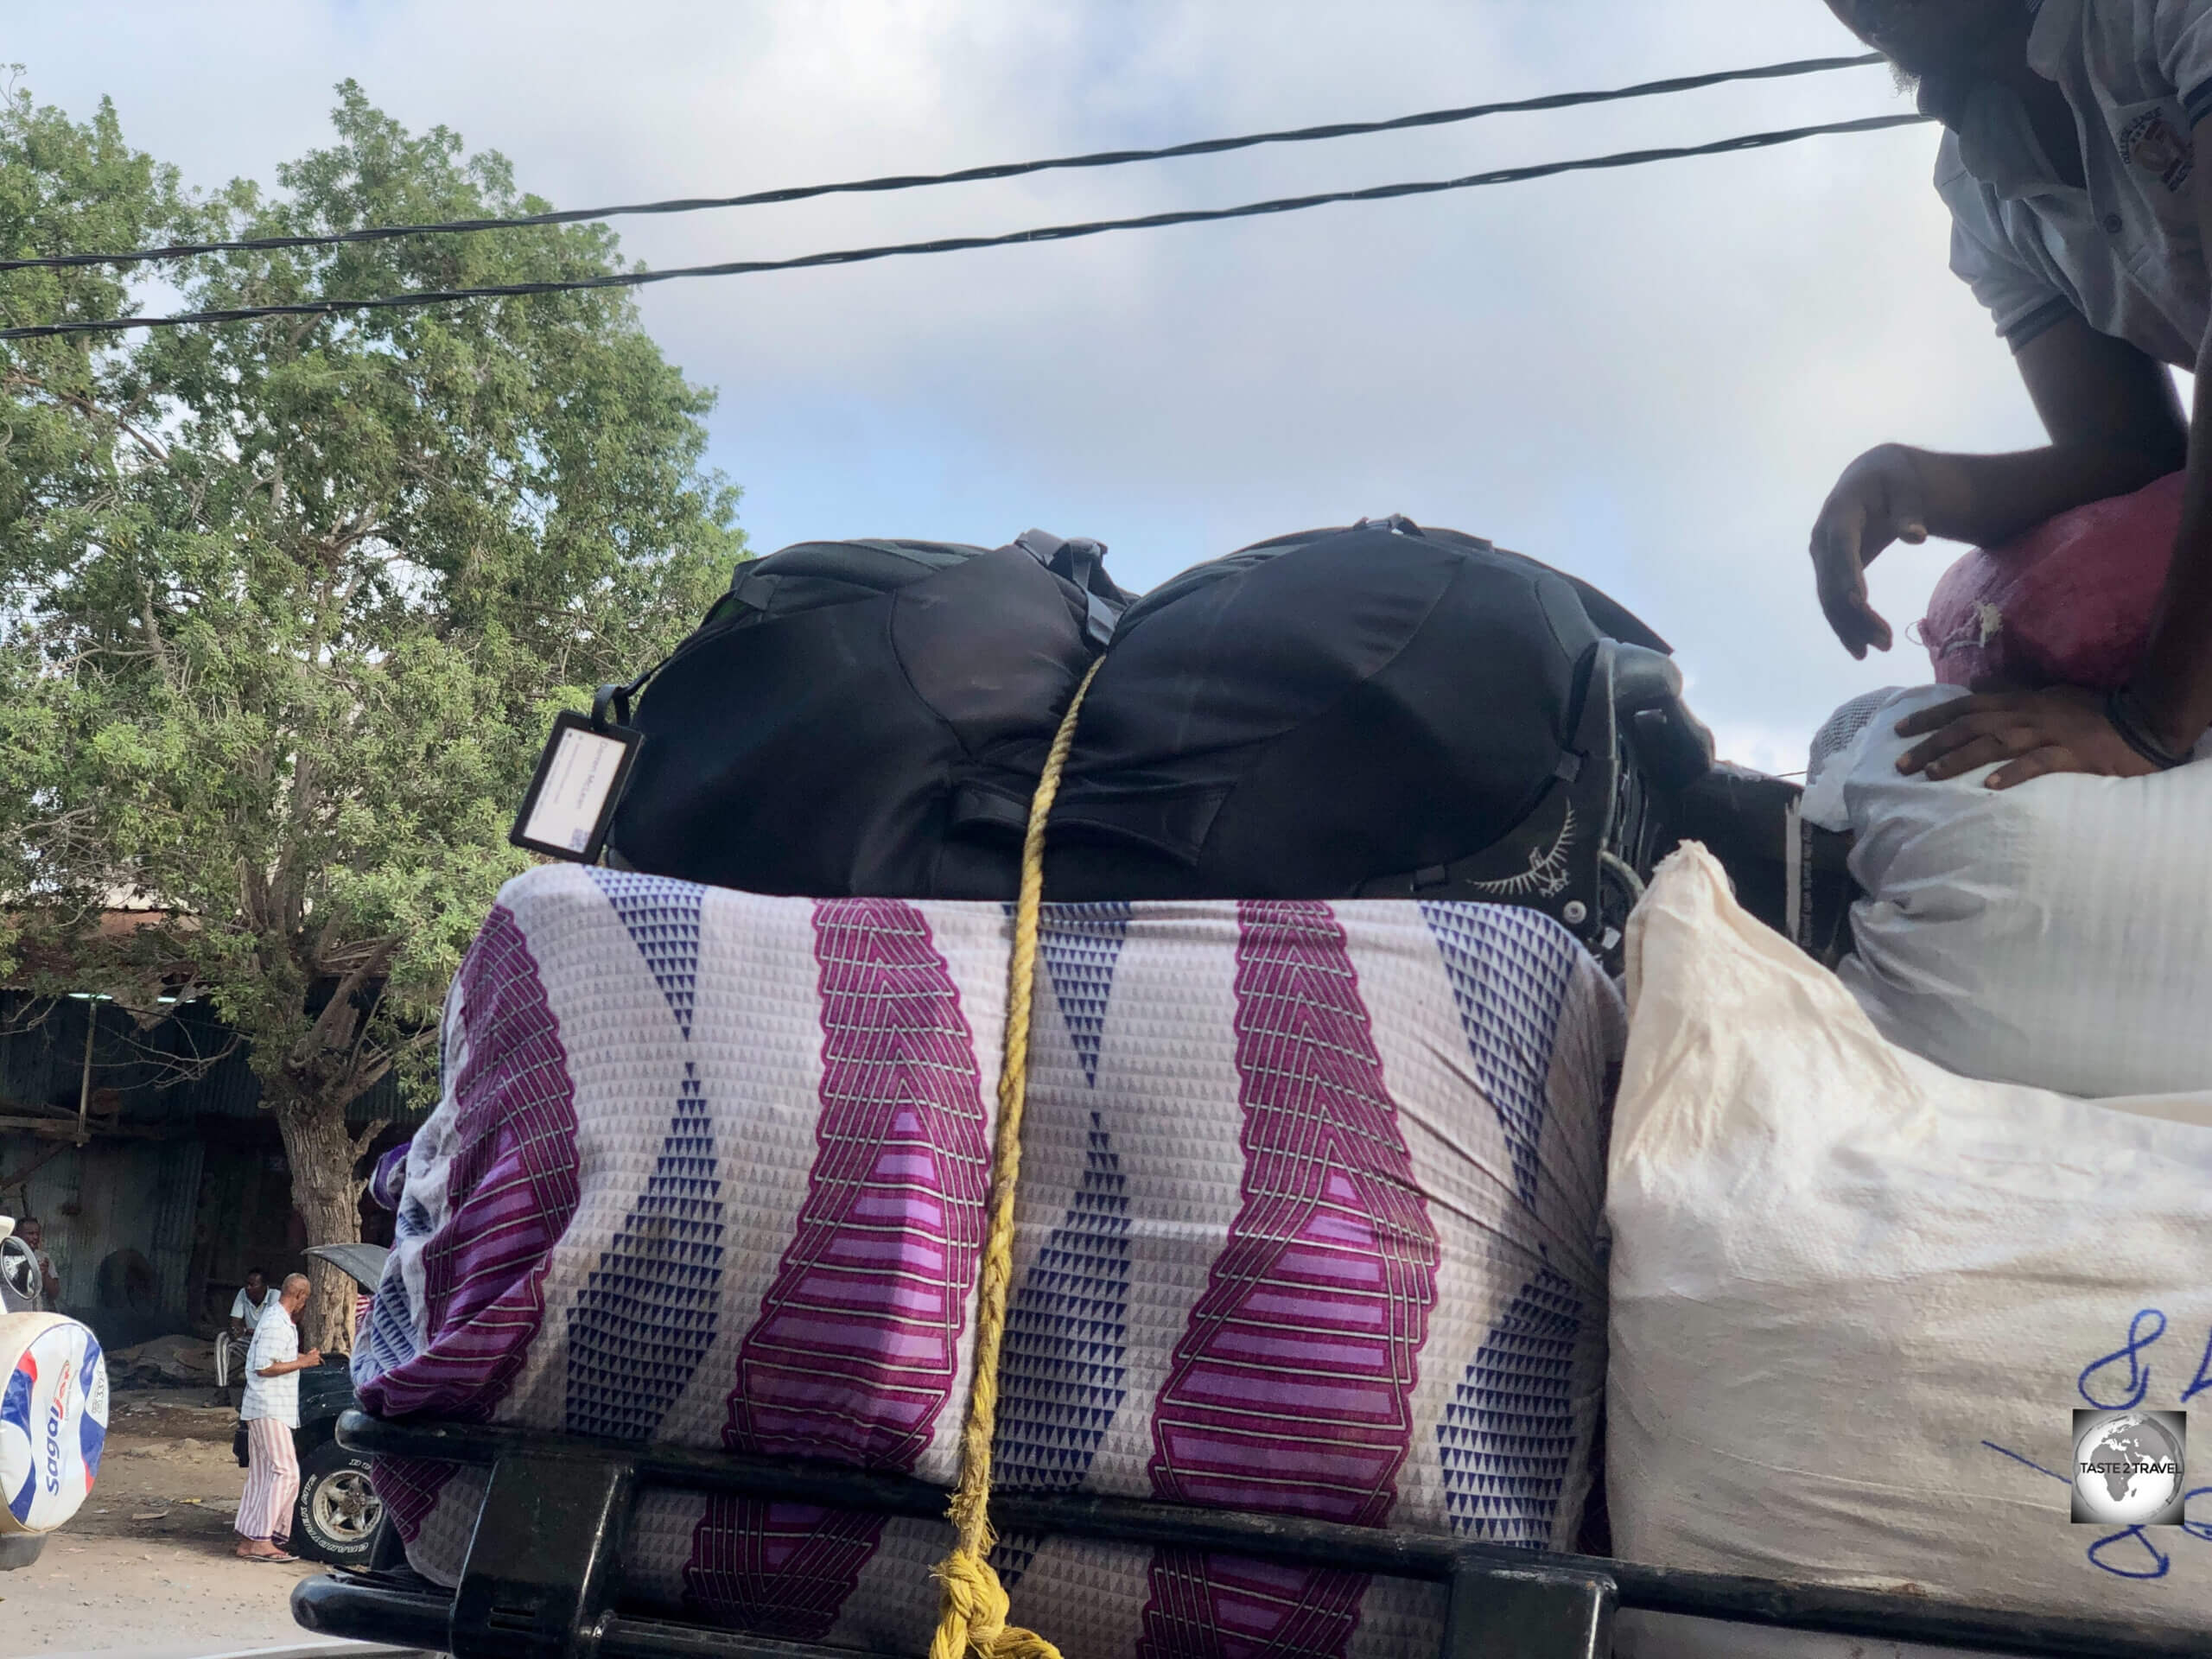 When first loaded in Djibouti City, my Sojourn travel bag was placed on top of the load. At the border, it was repacked and moved to the bottom of the pile.